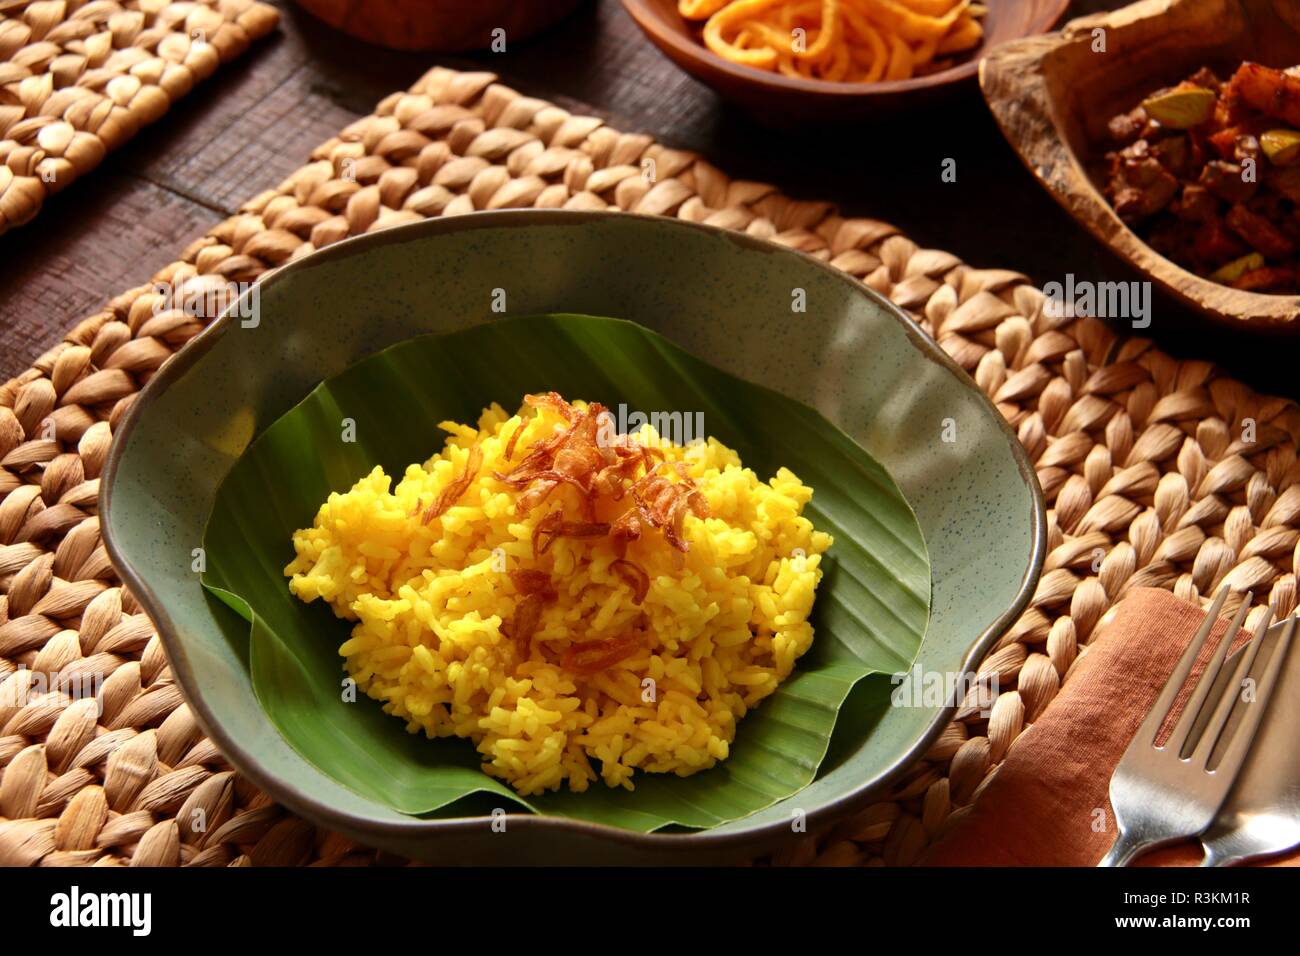 Nasi Kuning. Traditional Indonesian yellow (turmeric) rice, accompanied with several side dishes. Stock Photo